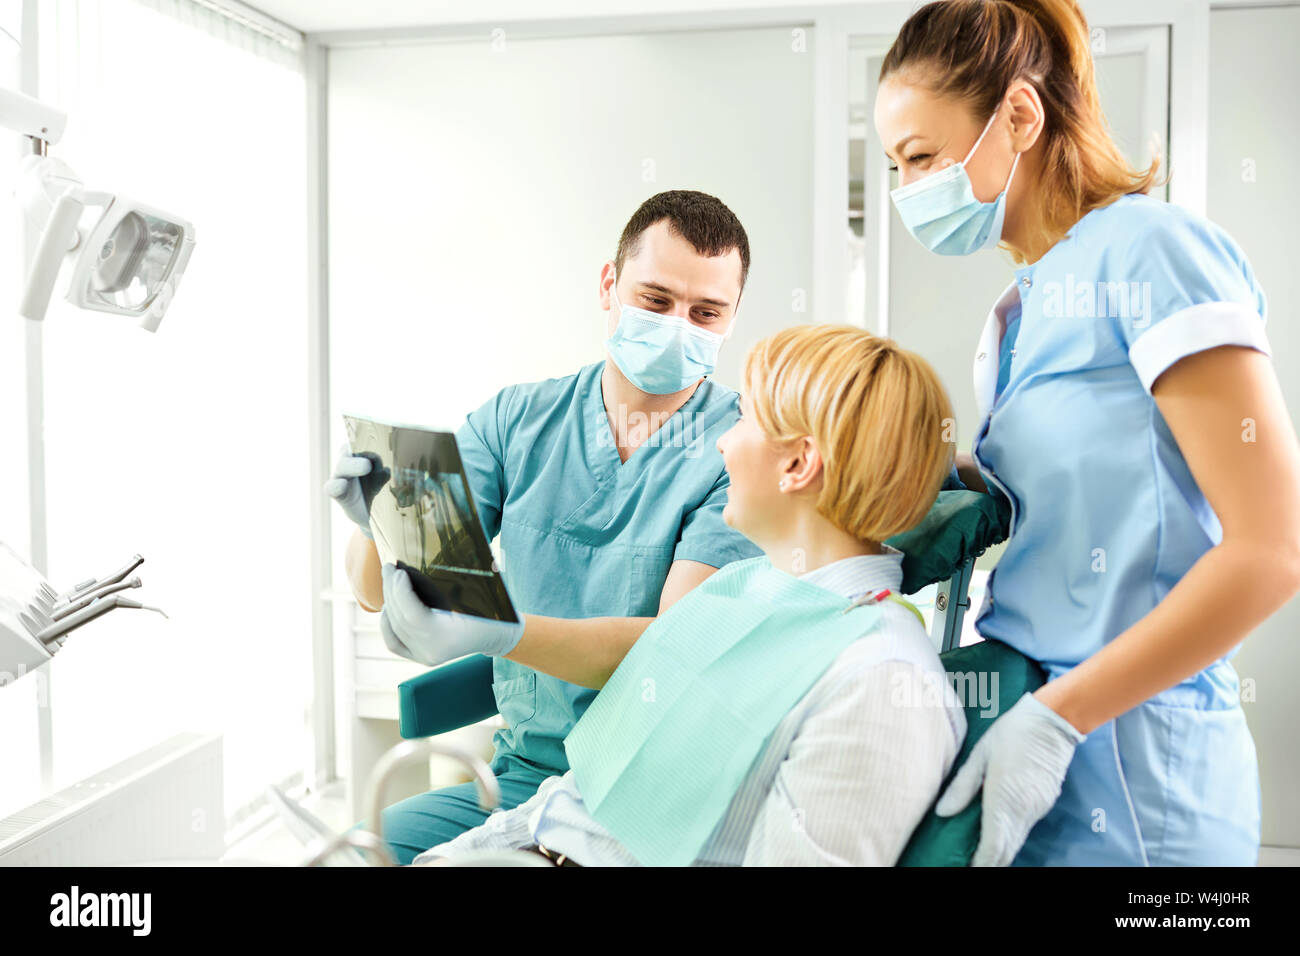 Dentist shows a x-ray image of a girl Stock Photo